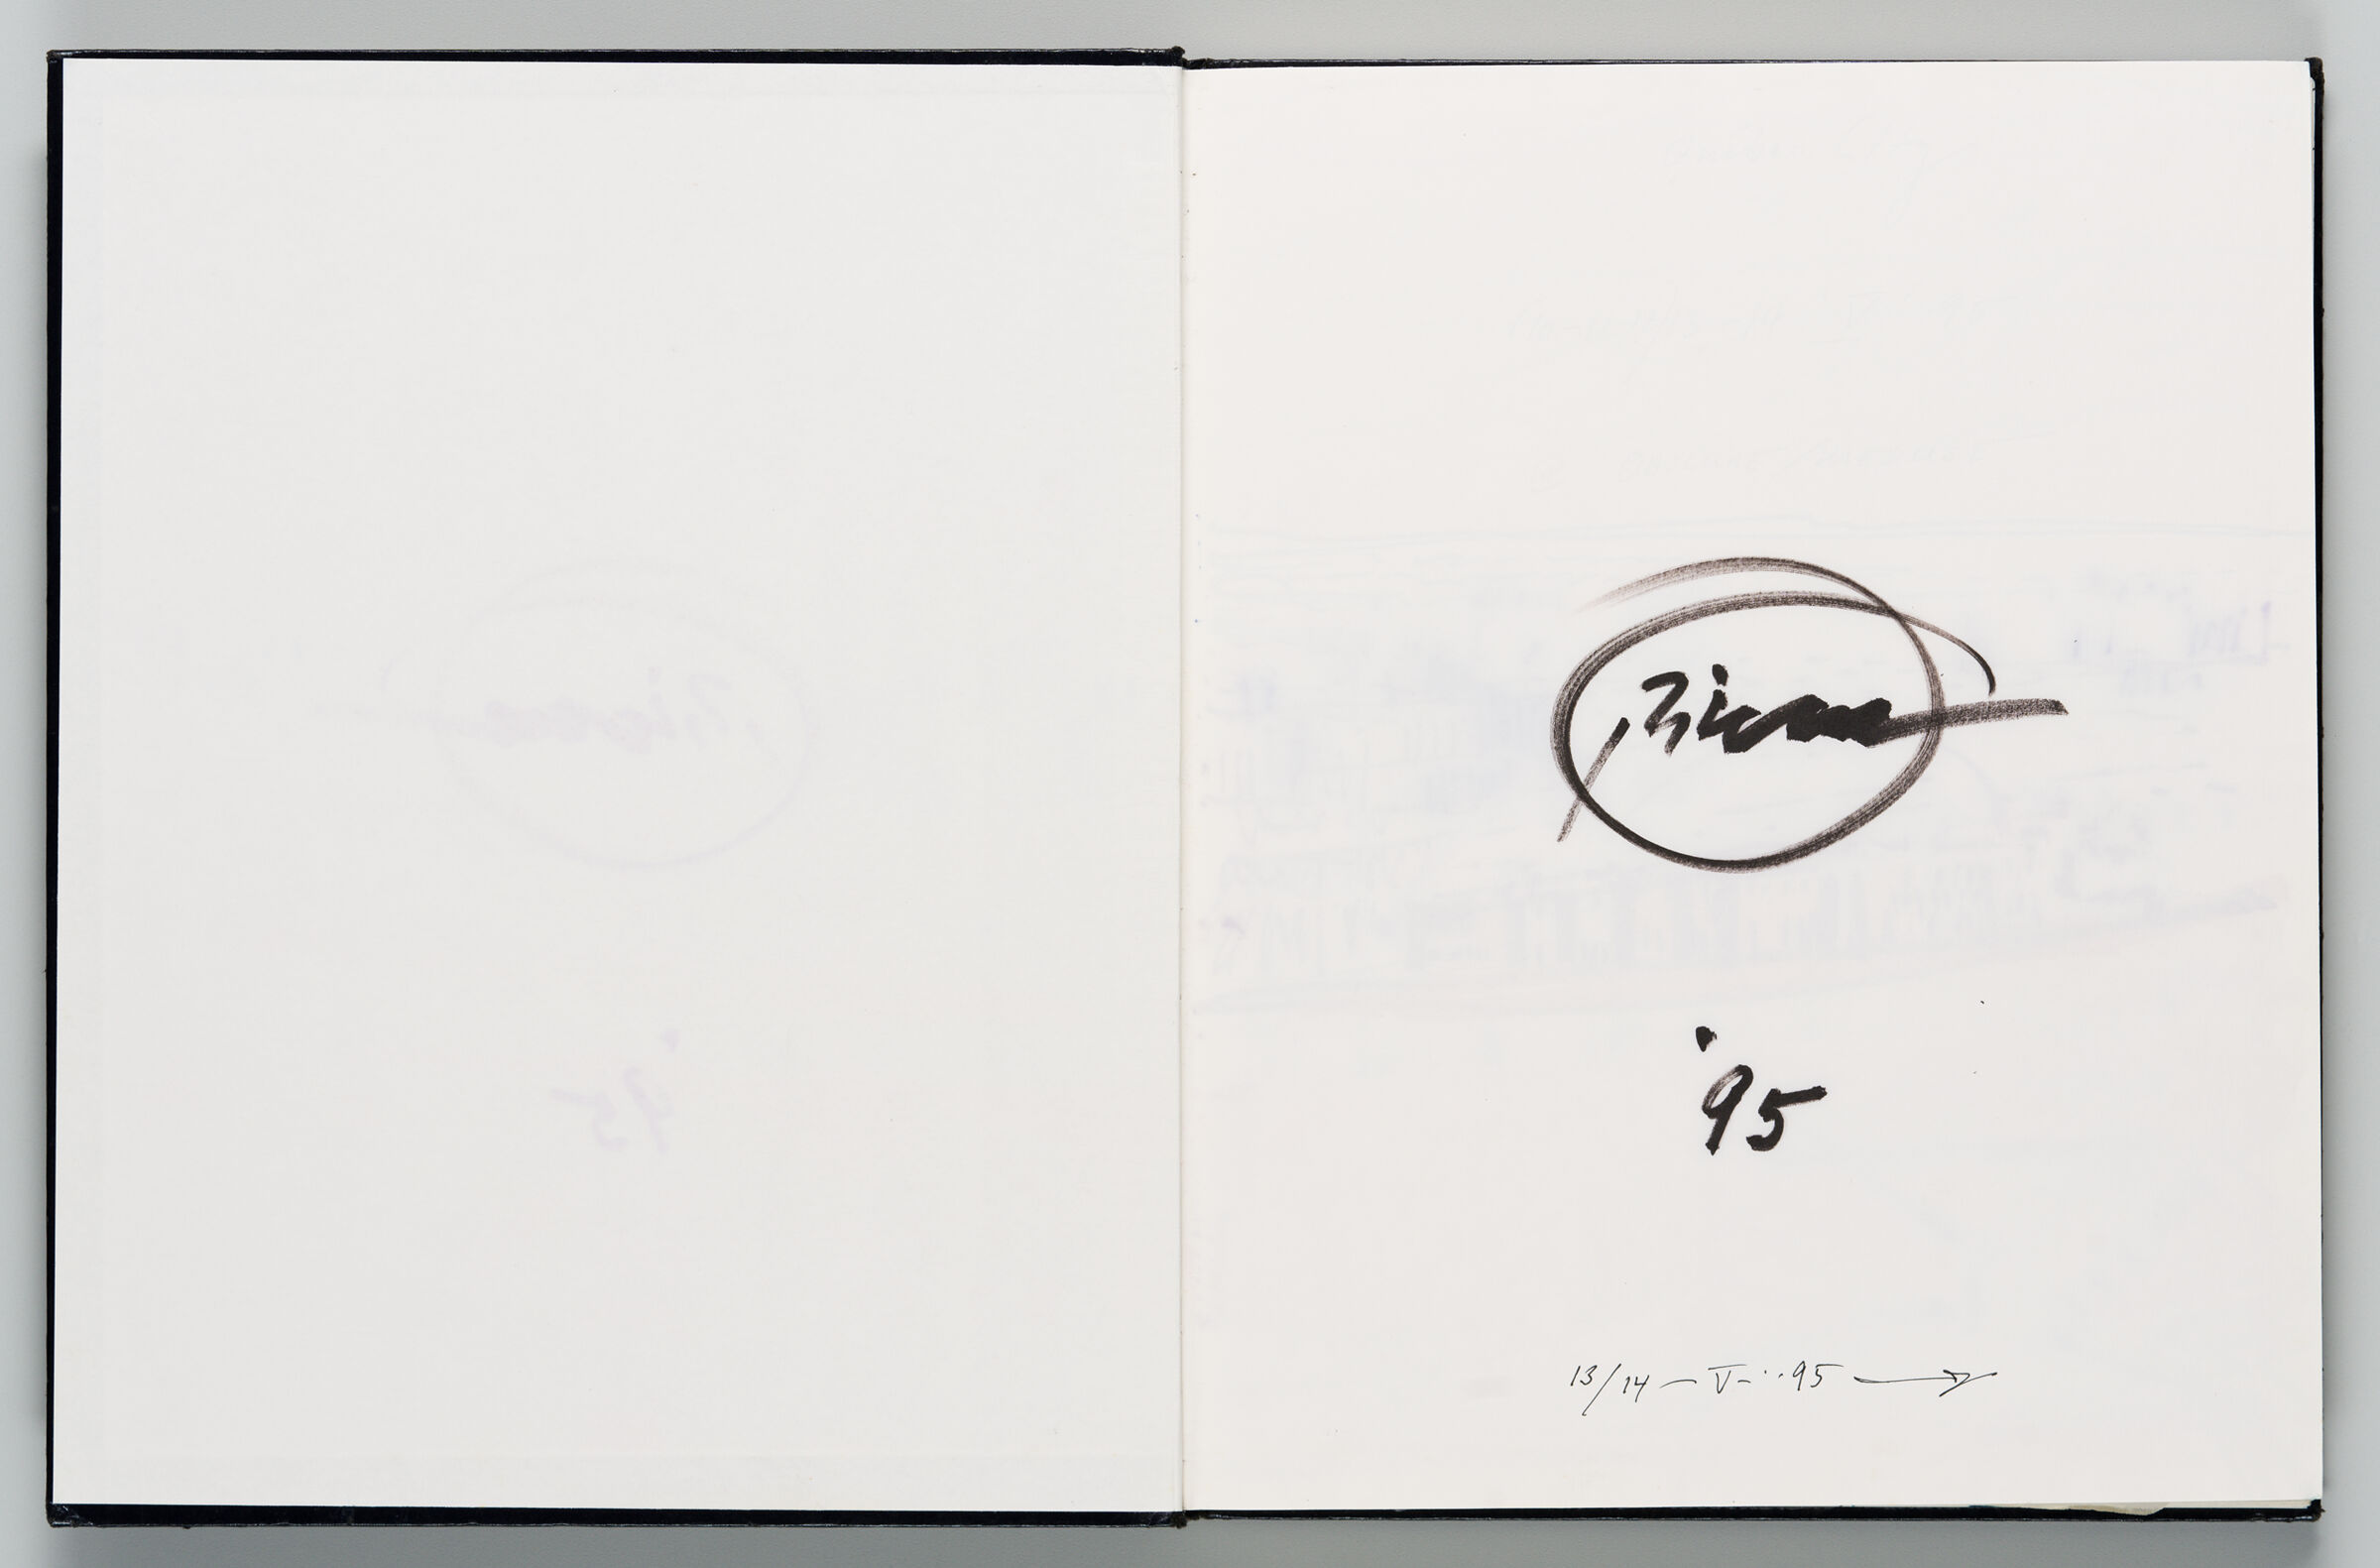 Untitled (Front Endpaper With Color Transfer Of Signature, Left Page); Untitled (Signature, Right Page)